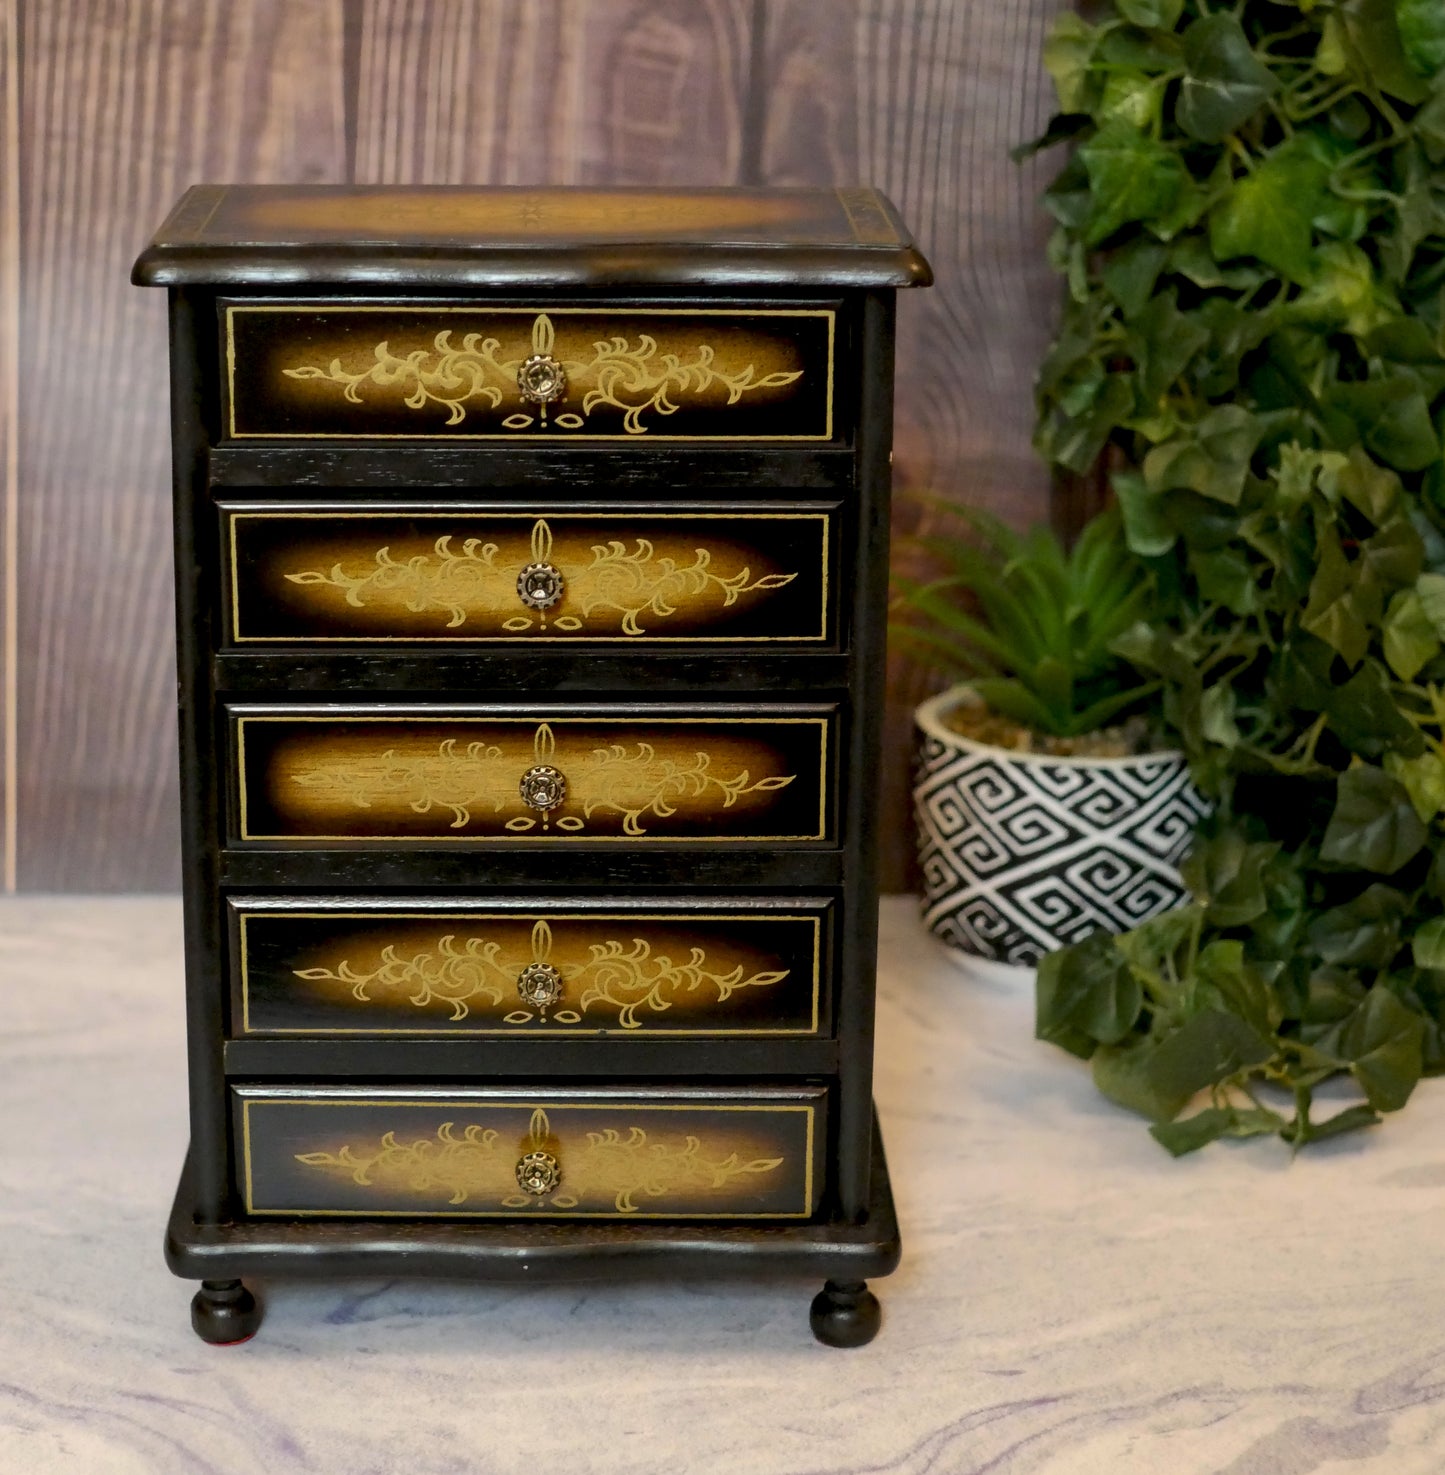 Chest Drawers Vintage Musical Jewelry Box - Wooden Handmade Jewelry Box 11.5"